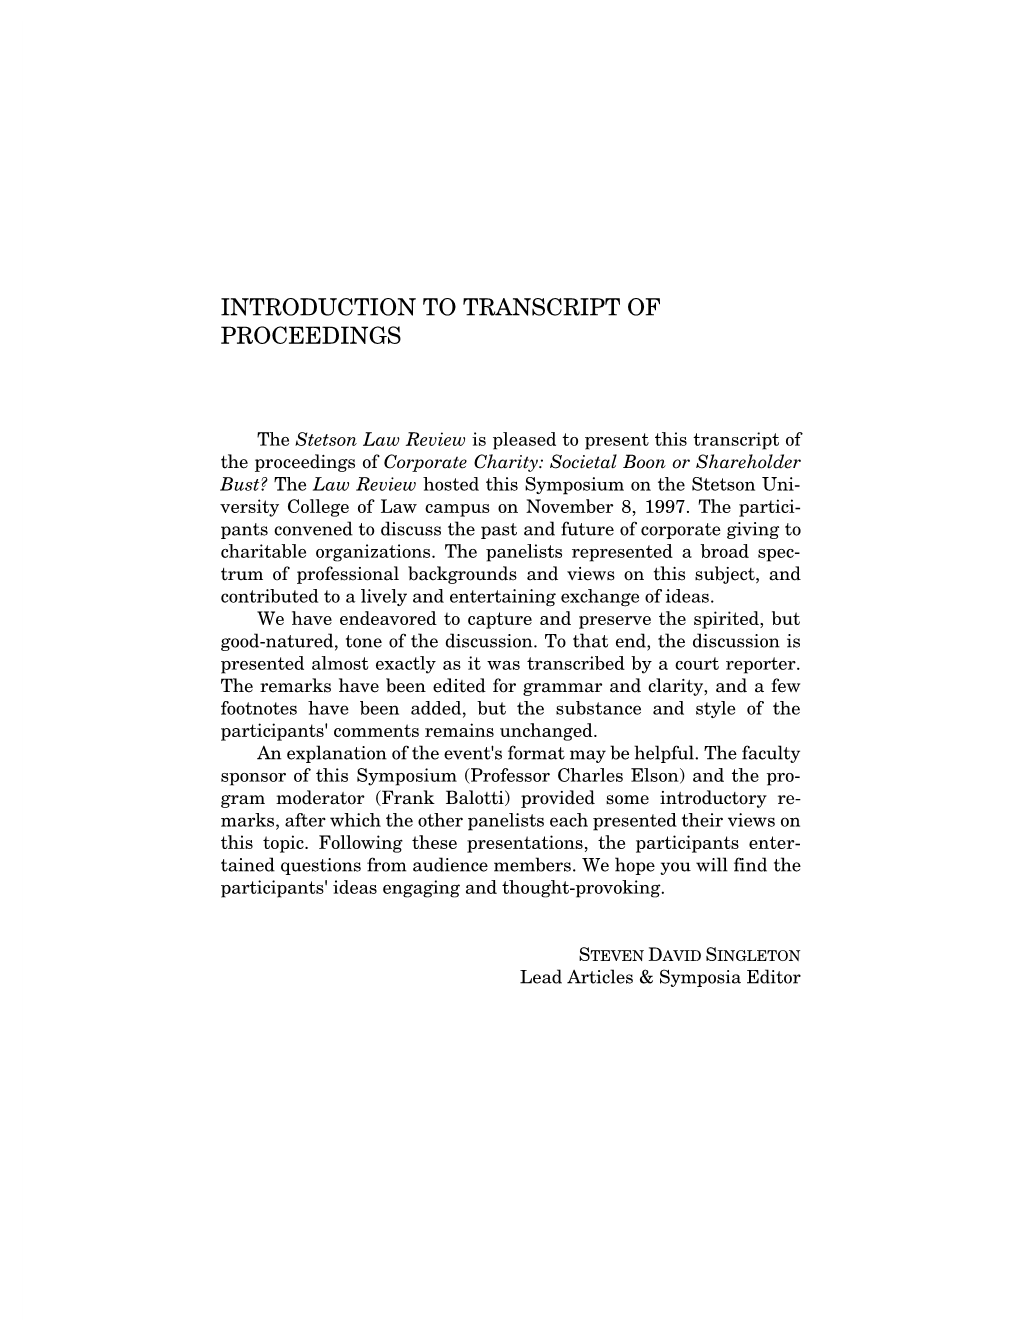 Introduction to Transcript of Proceedings